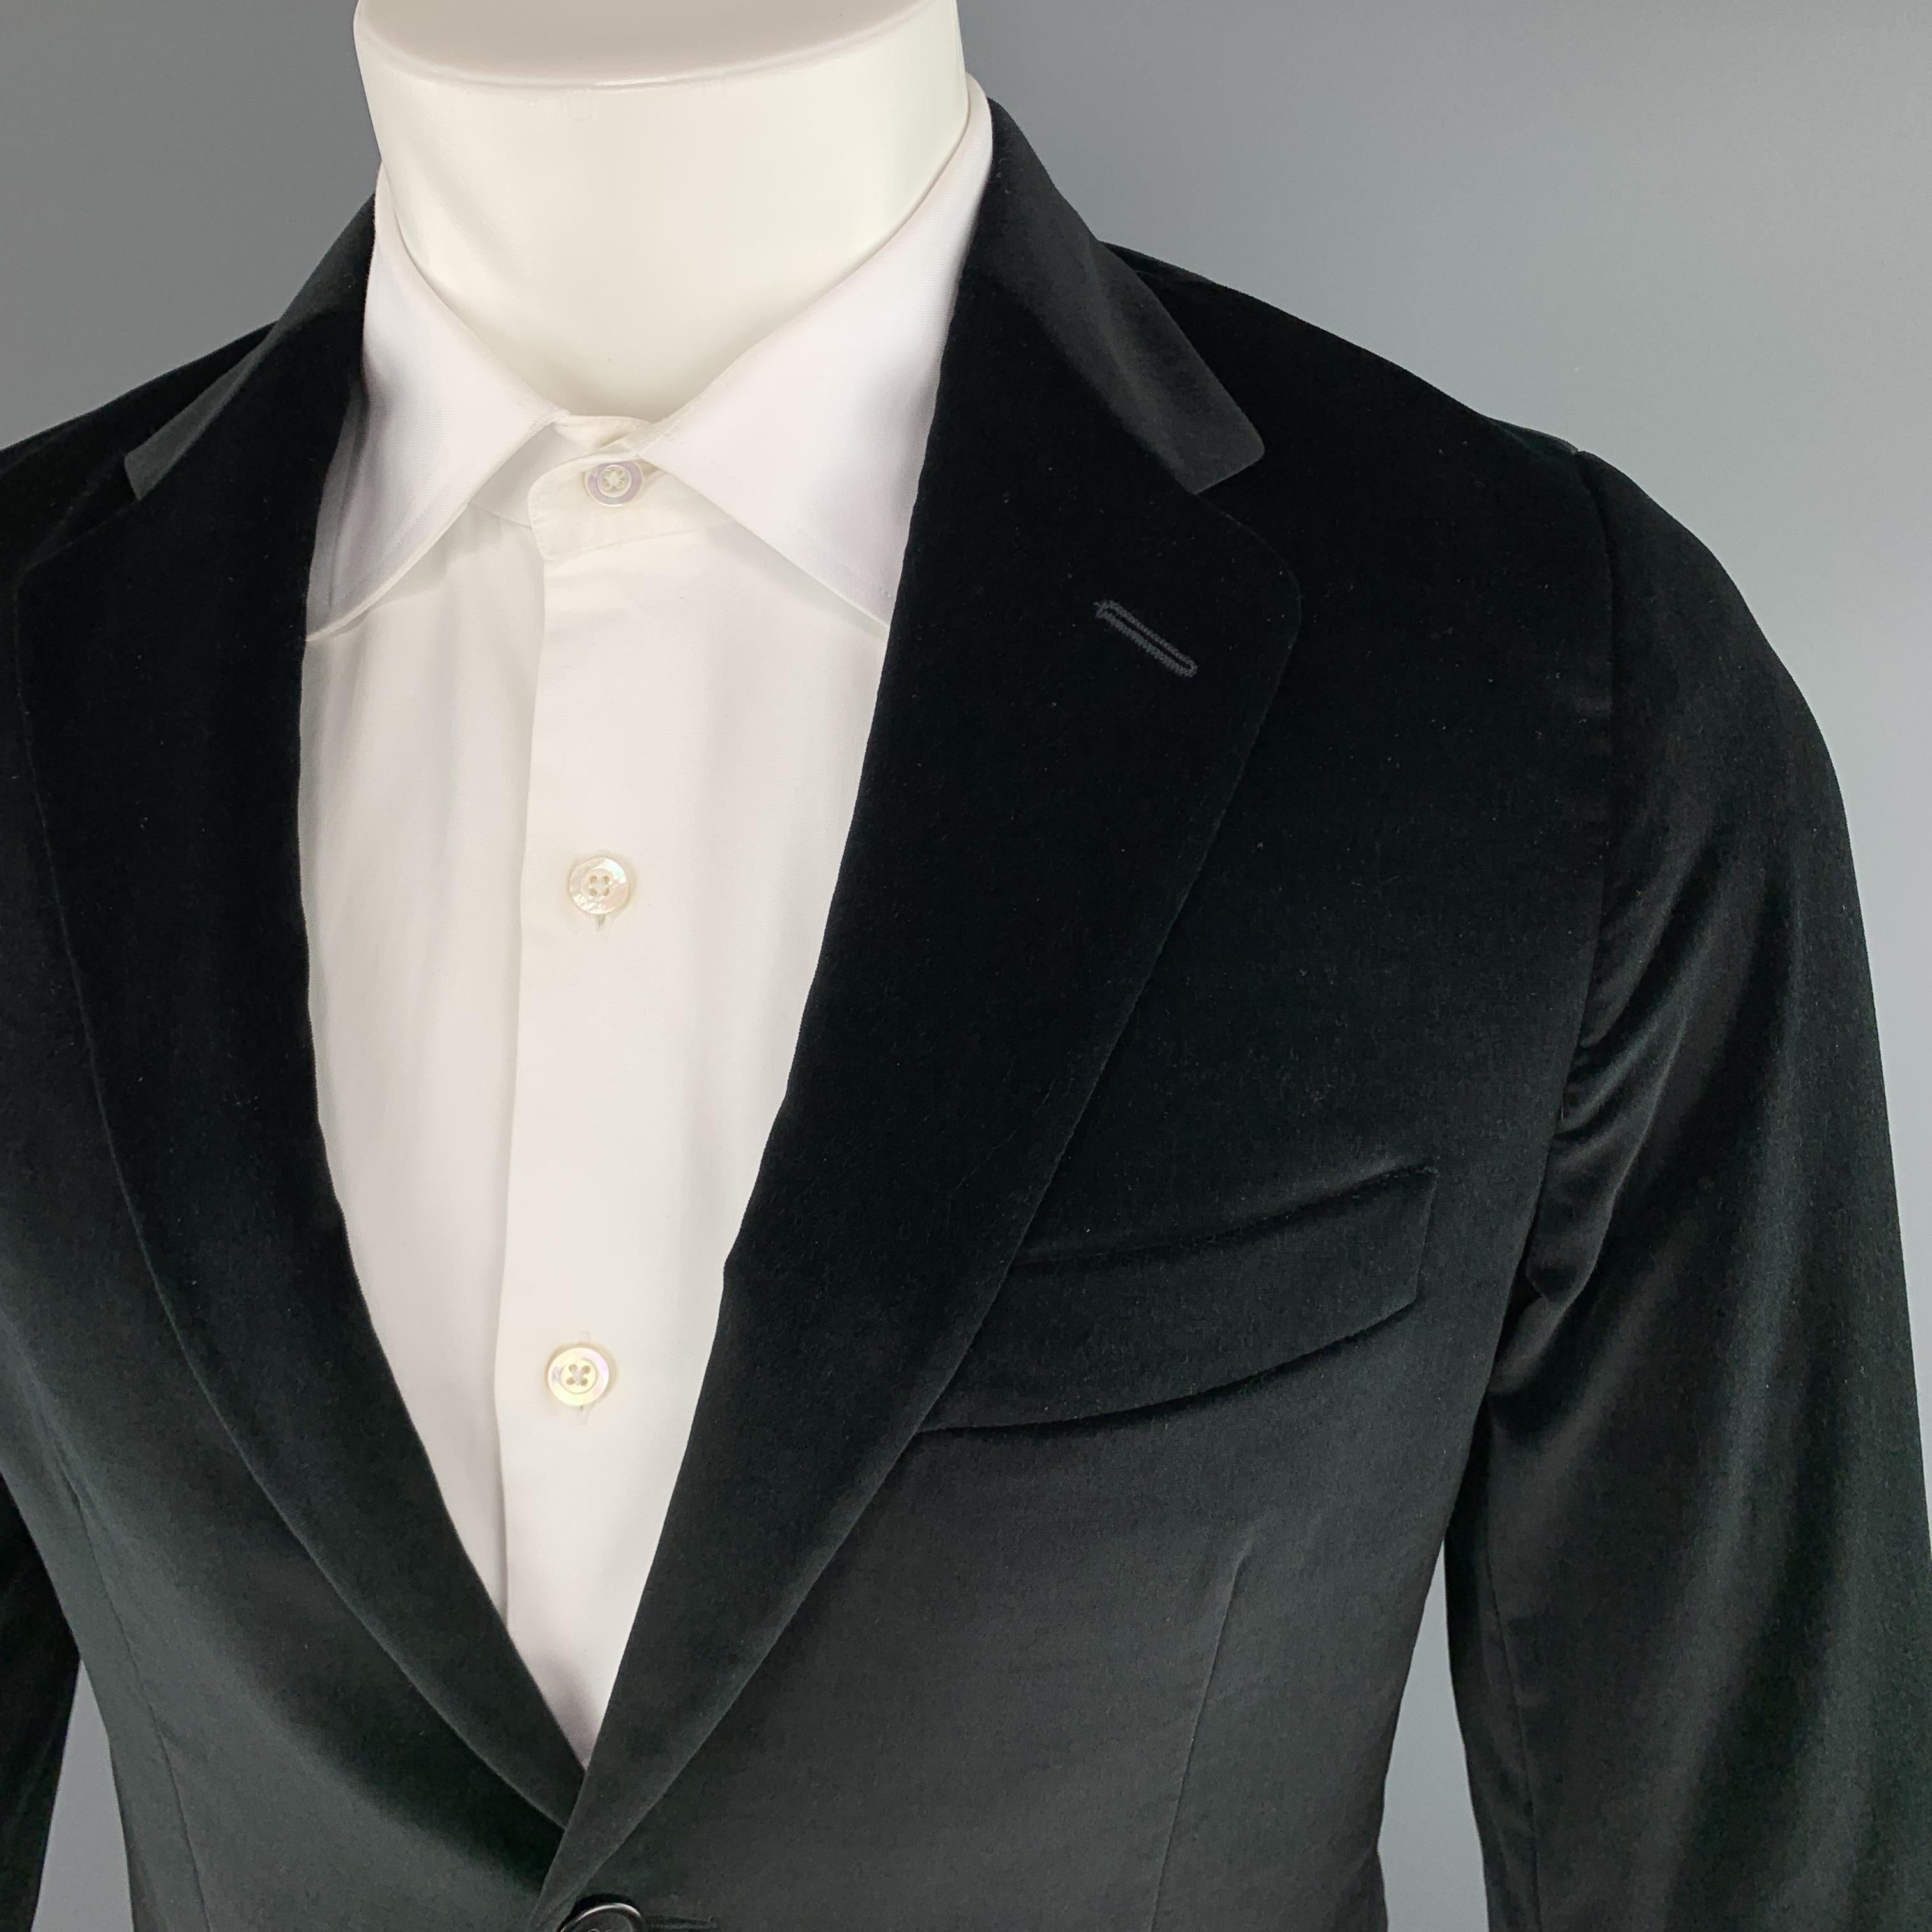 THEORY sport coat comes in black velvet with a notch lapel, single breasted, two button front, and single vented back. Made in Italy.

Excellent Pre-Owned Condition.
Marked: 38 R

Measurements:

Shoulder: 15 in.
Chest: 40 in.
Sleeve: 25 in.
Length: